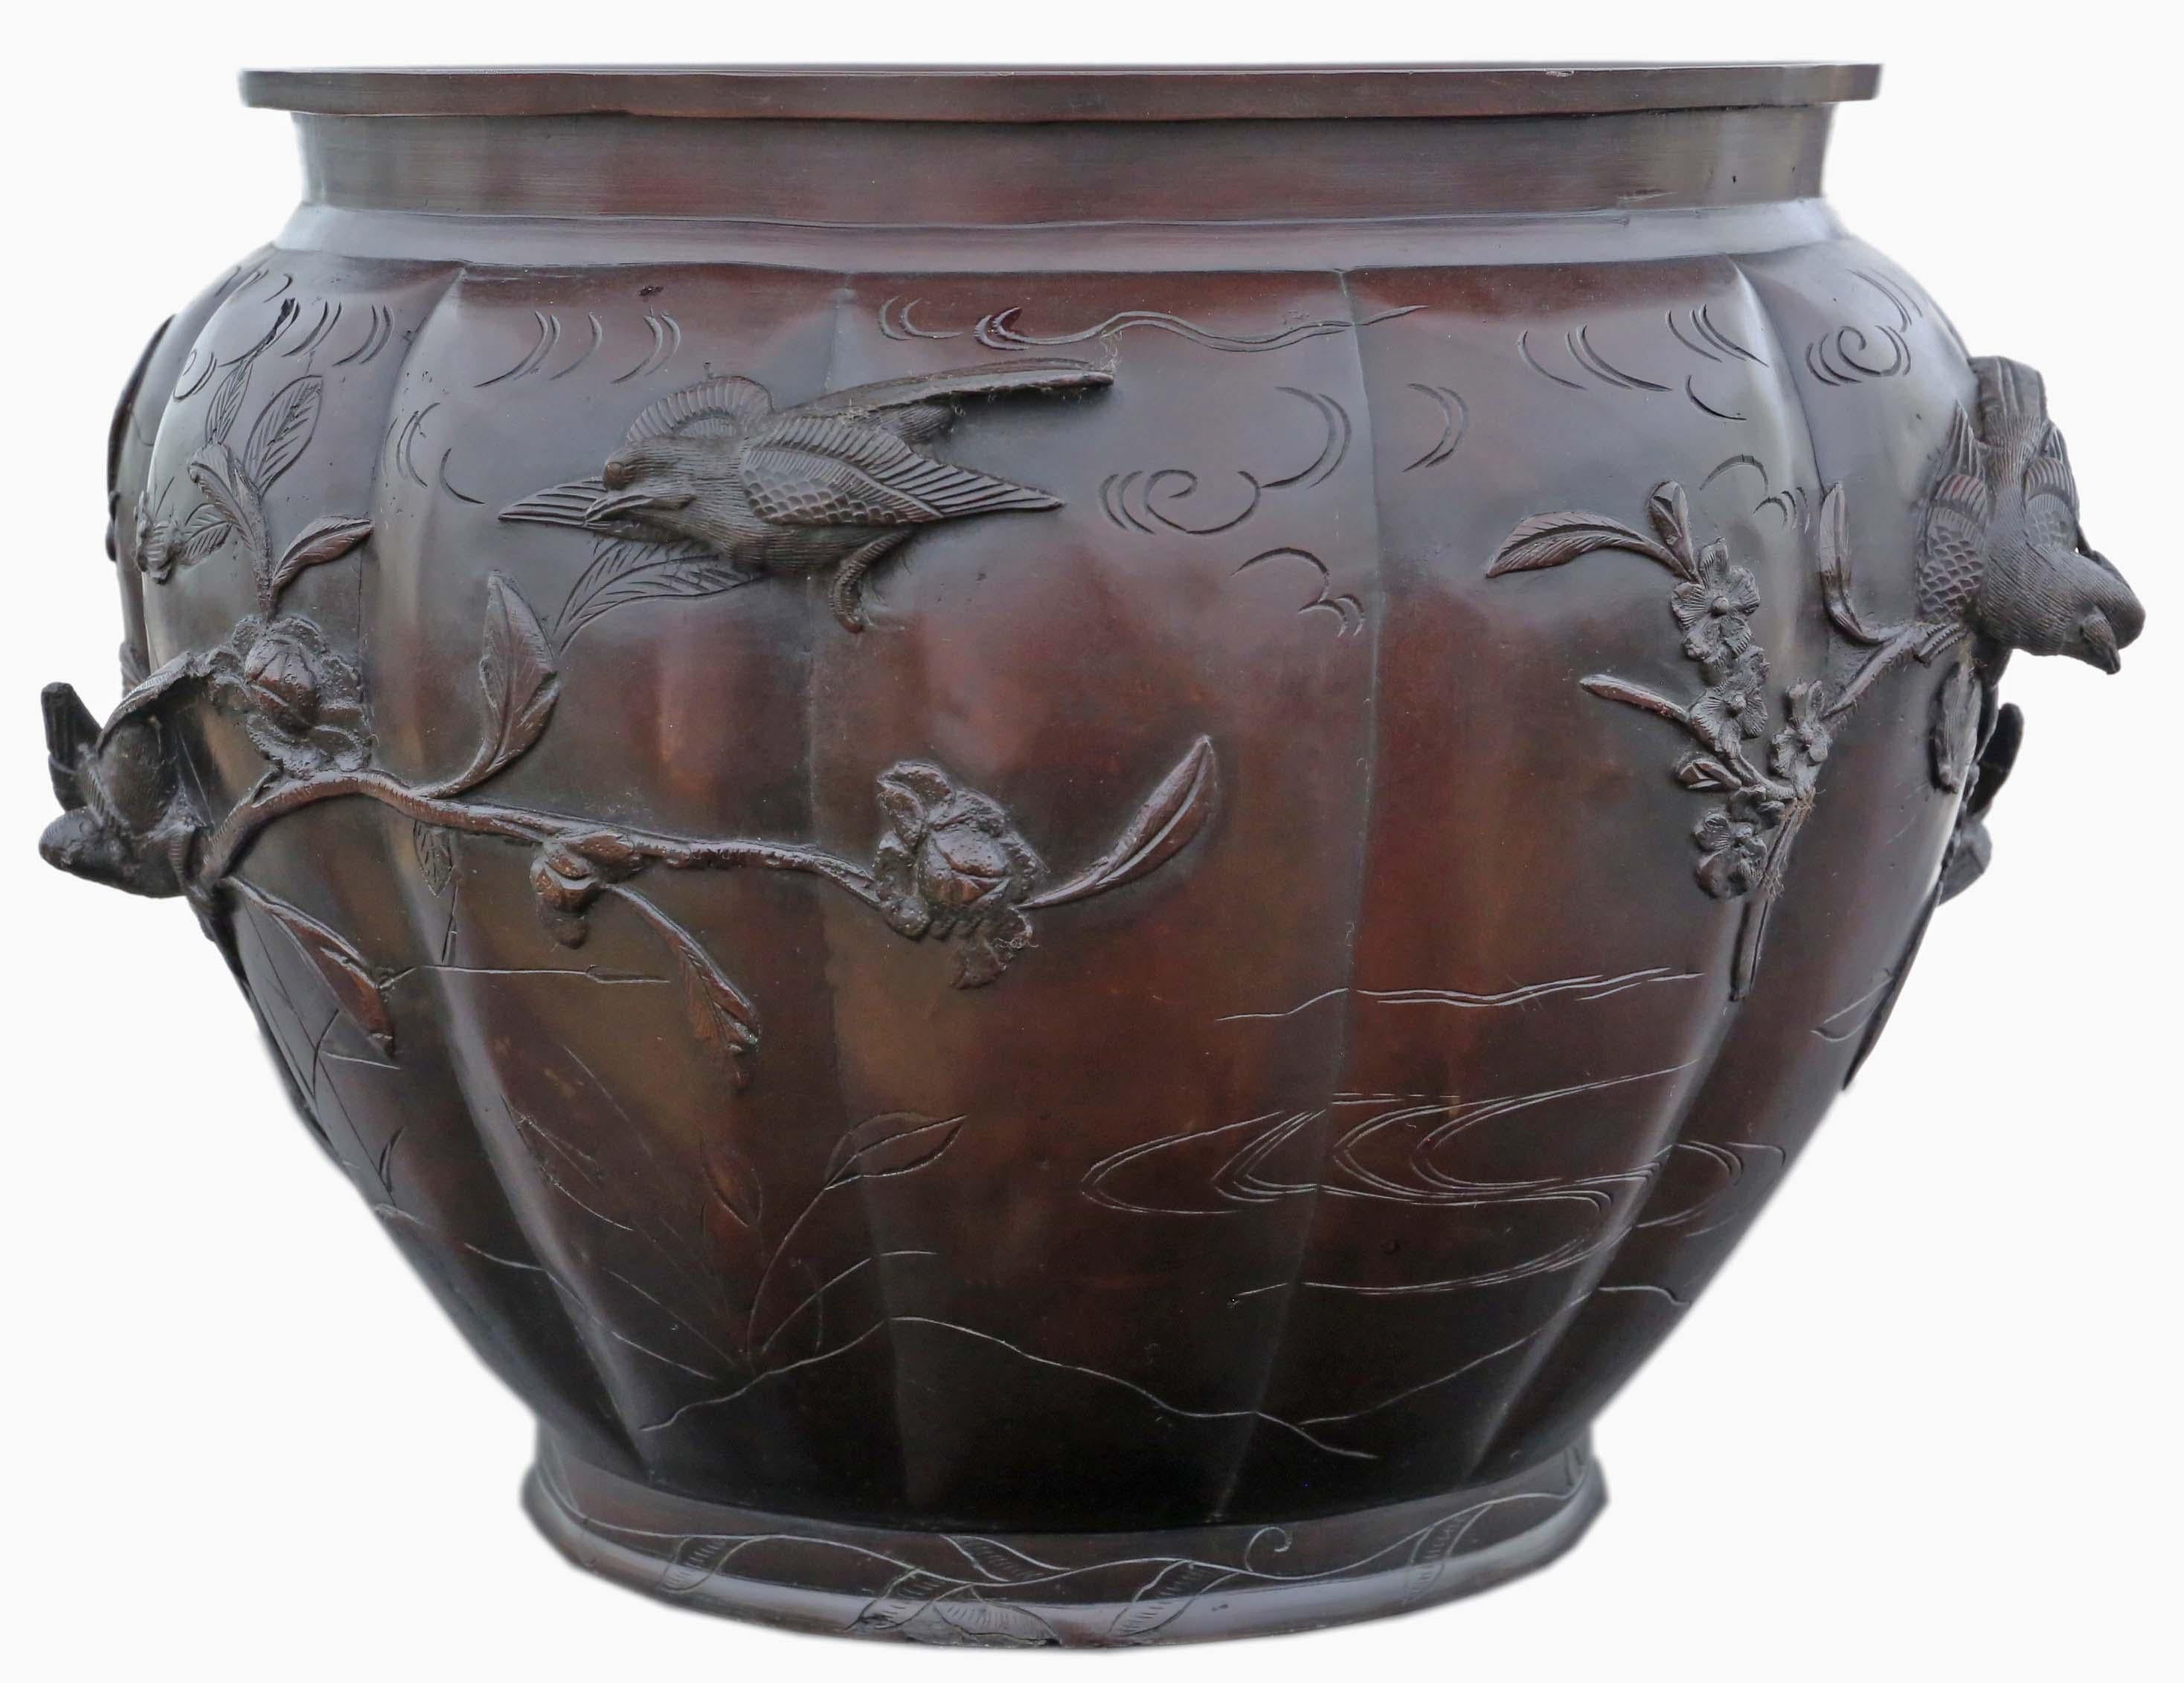 Antique fine quality large Oriental Japanese bronze Jardinière planter bowl censor Meiji Period, 19th Century. Stamped artist piece

Would look amazing in the right location and make a fabulous centre piece. Rare large size and design. Truly